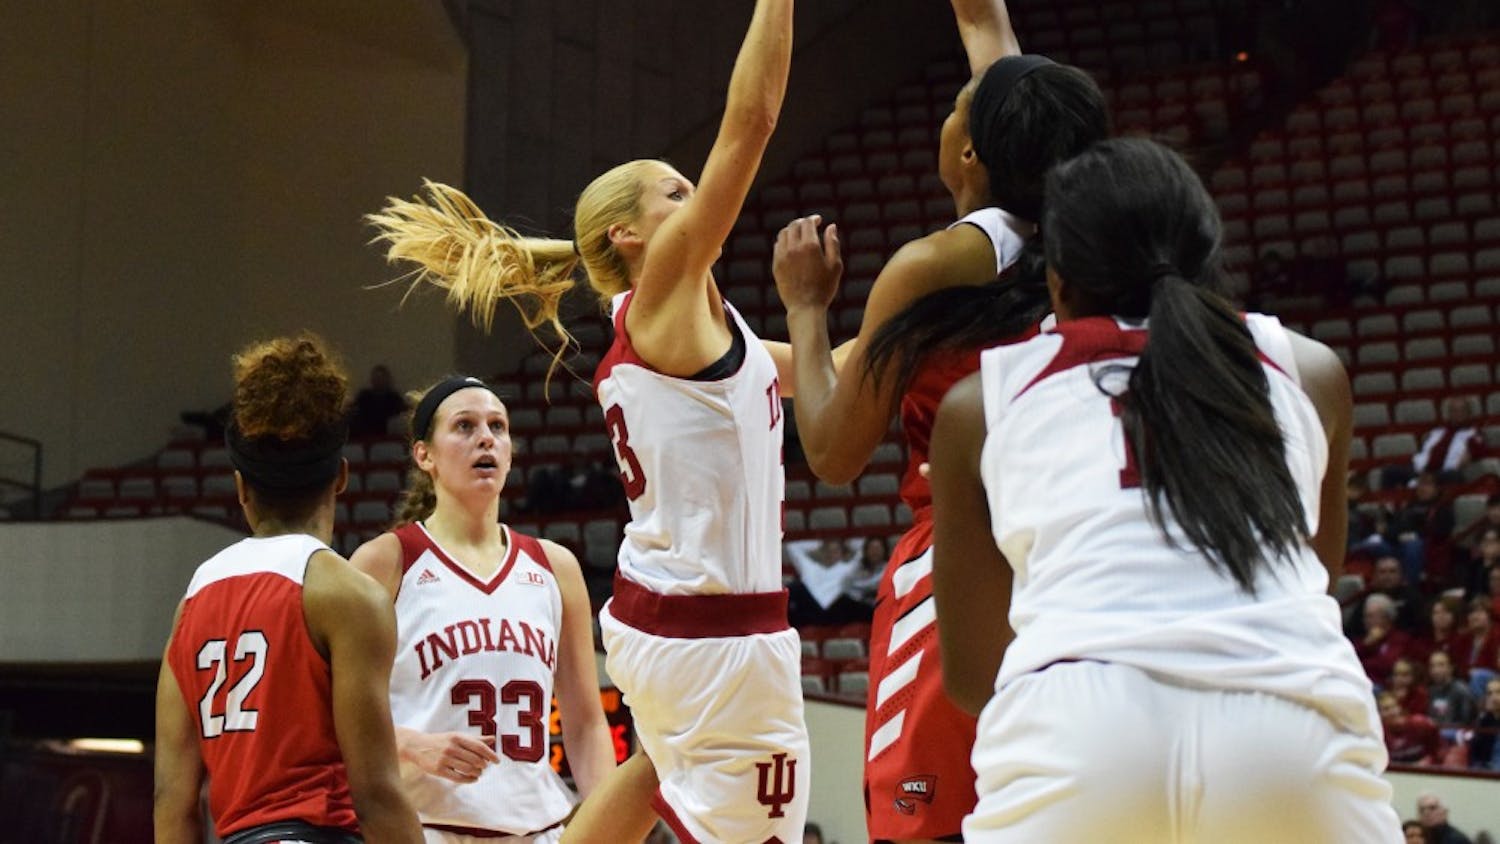 Senior guard Tyra Buss takes a shot against Western Kentucky on Nov. 17 at Simon Skjodt Assembly Hall. Buss and the Hoosier will play their highest-ranked opponent of the season Thursday night when No. 4 Louisville comes to Bloomington.